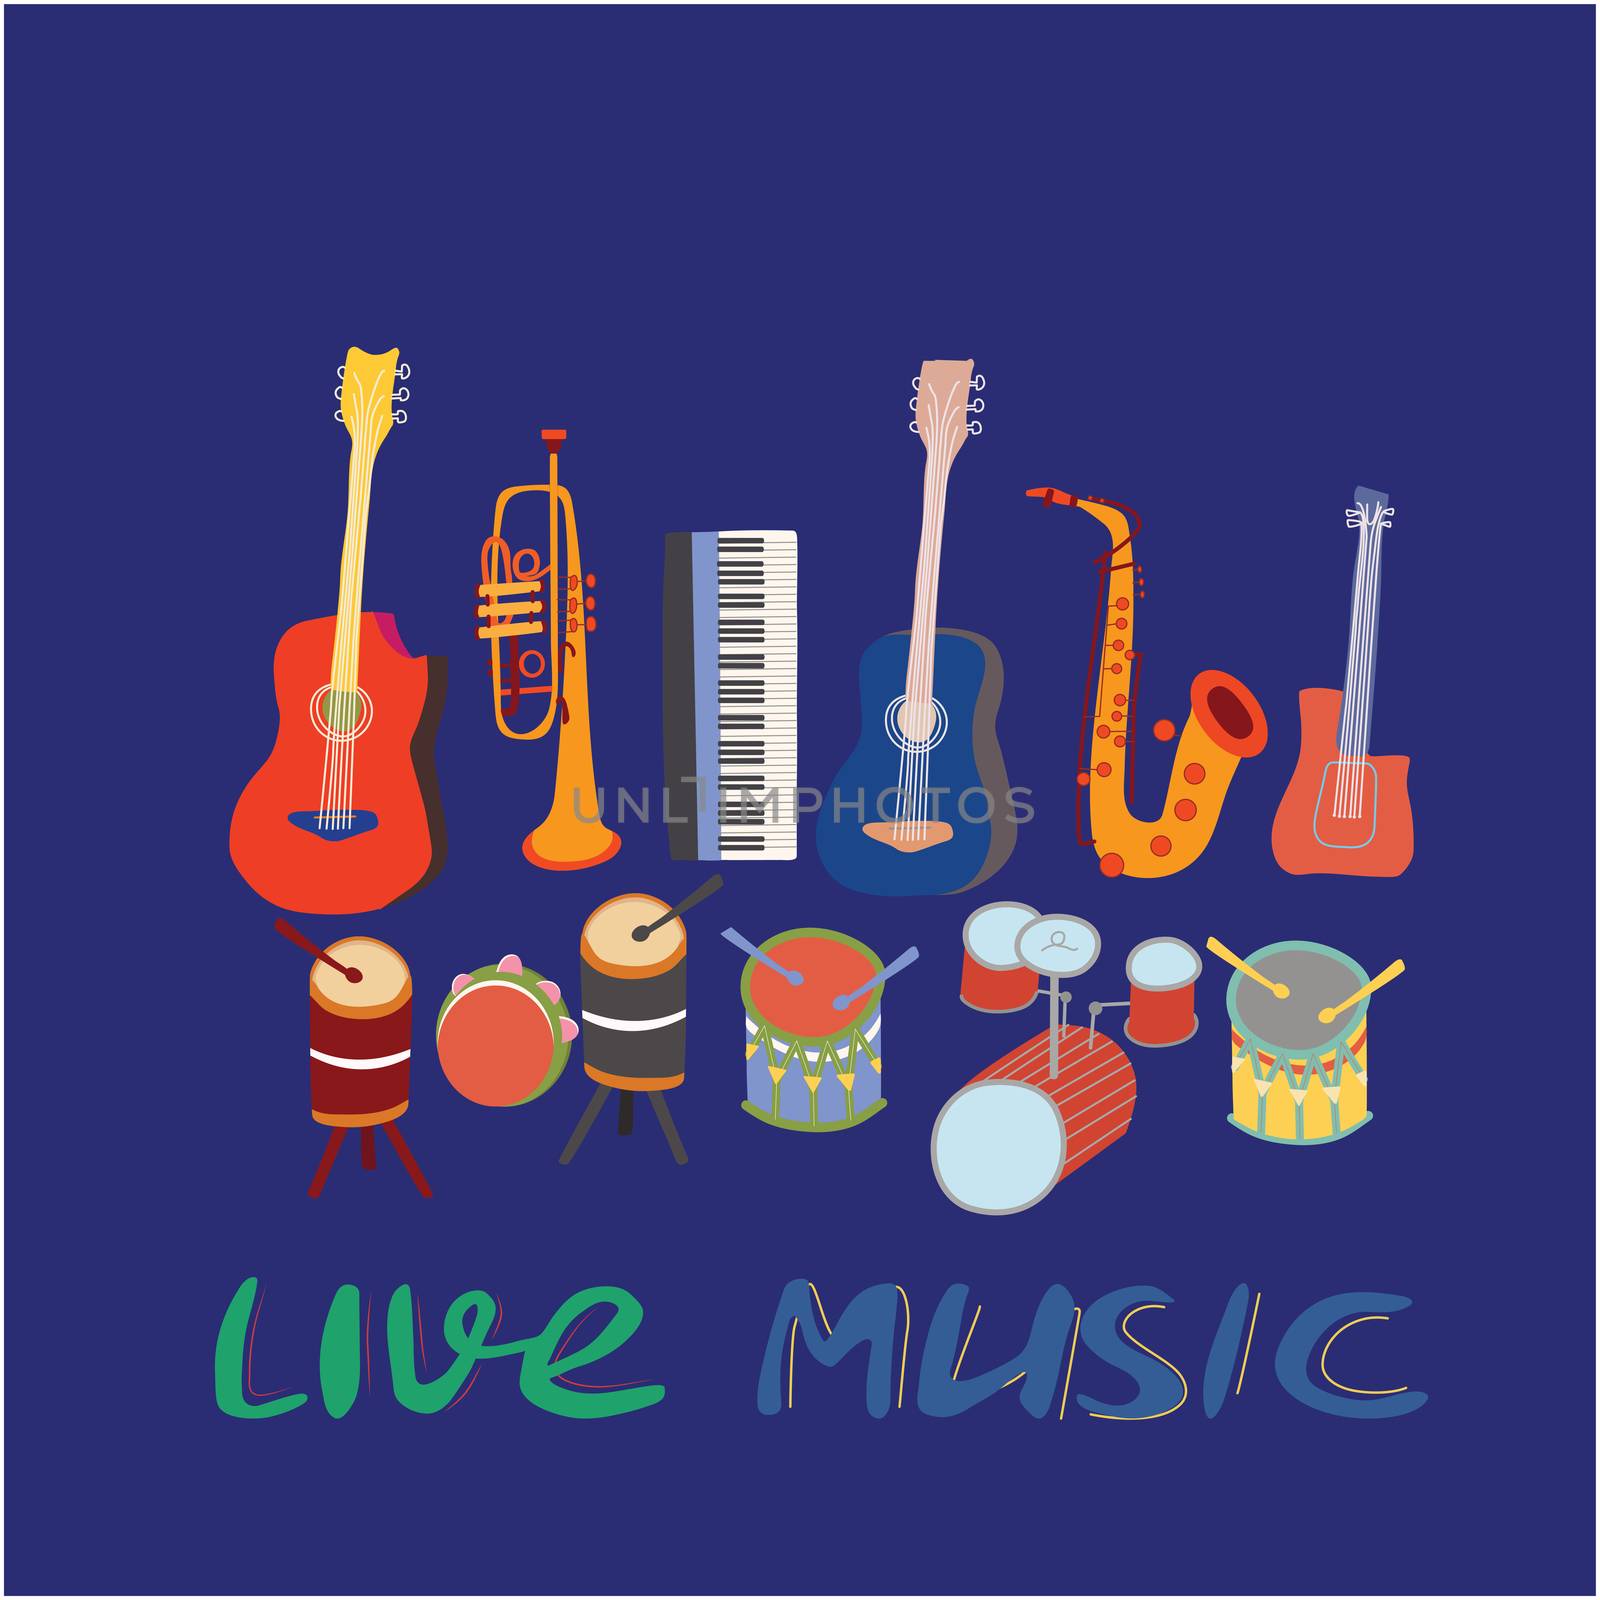 Music instruments with lettering live music. Blue background. Poster template. Rock, jazz concert, vector design brochures, flyers or cards. Musical instruments and lettering sketch composition.